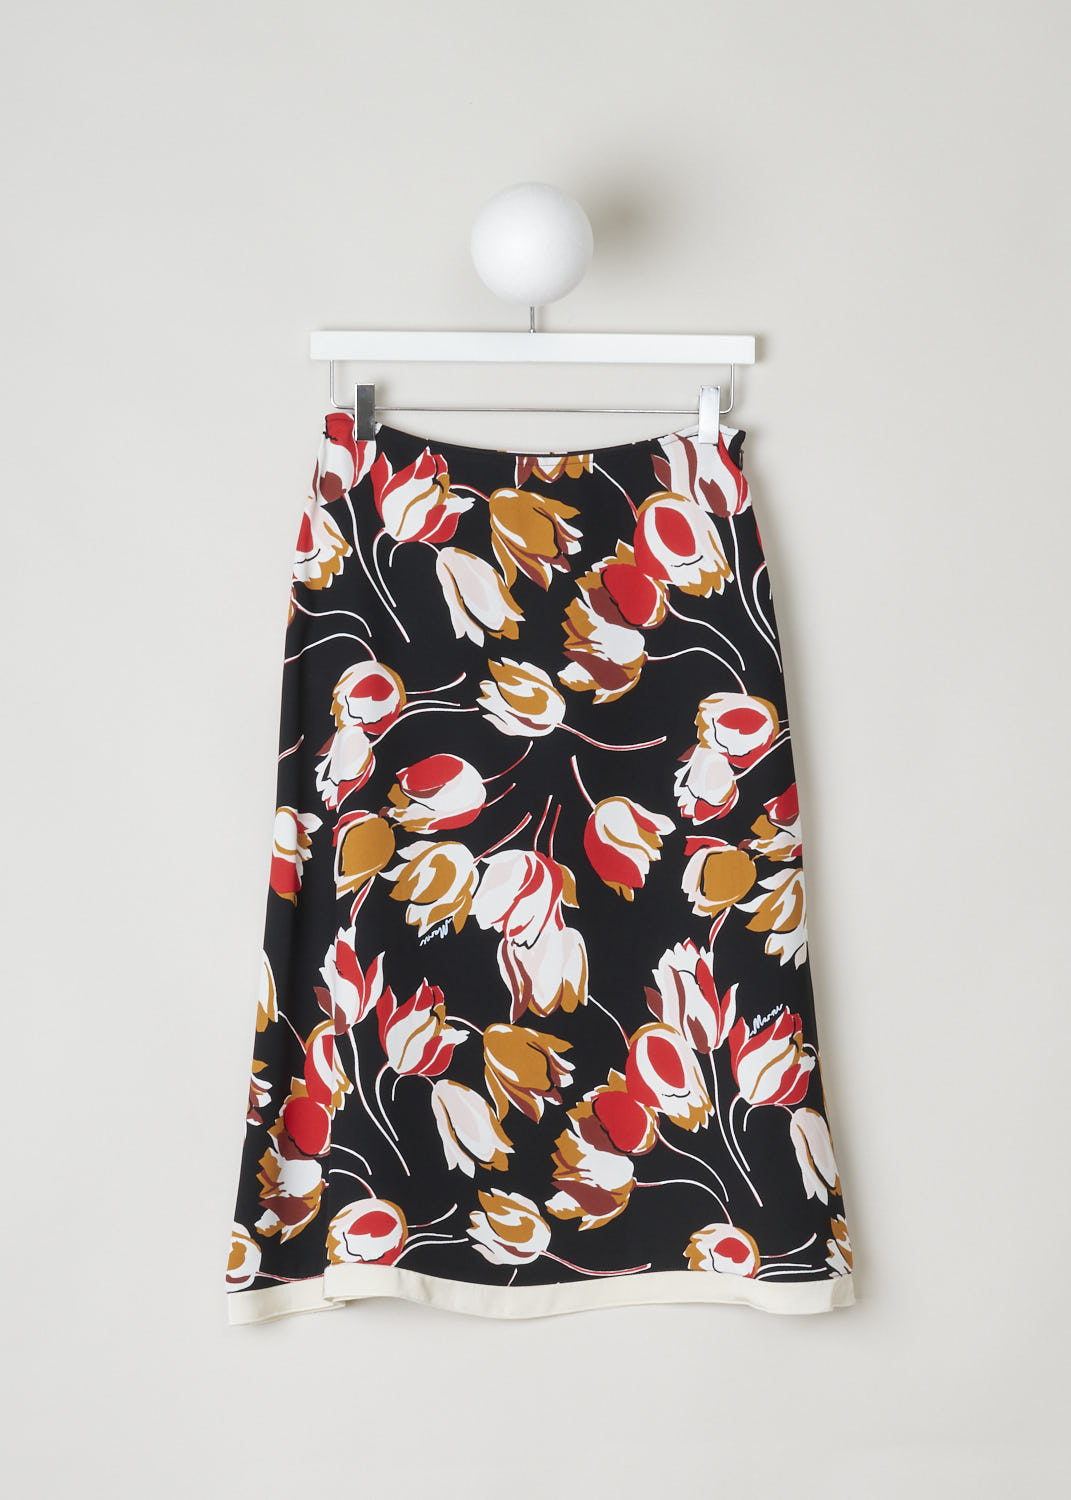 MARNI, BLACK A-LINE SKIRT WITH RED FLORAL PRINT, GOMA0042Q0_UTV844_WIIN99, Black, Print, Front, This black A-line skirt has a floral print in shades of reds and browns. A concealed side zip functions as the closing option. The skirt has a white satin hemline.  
